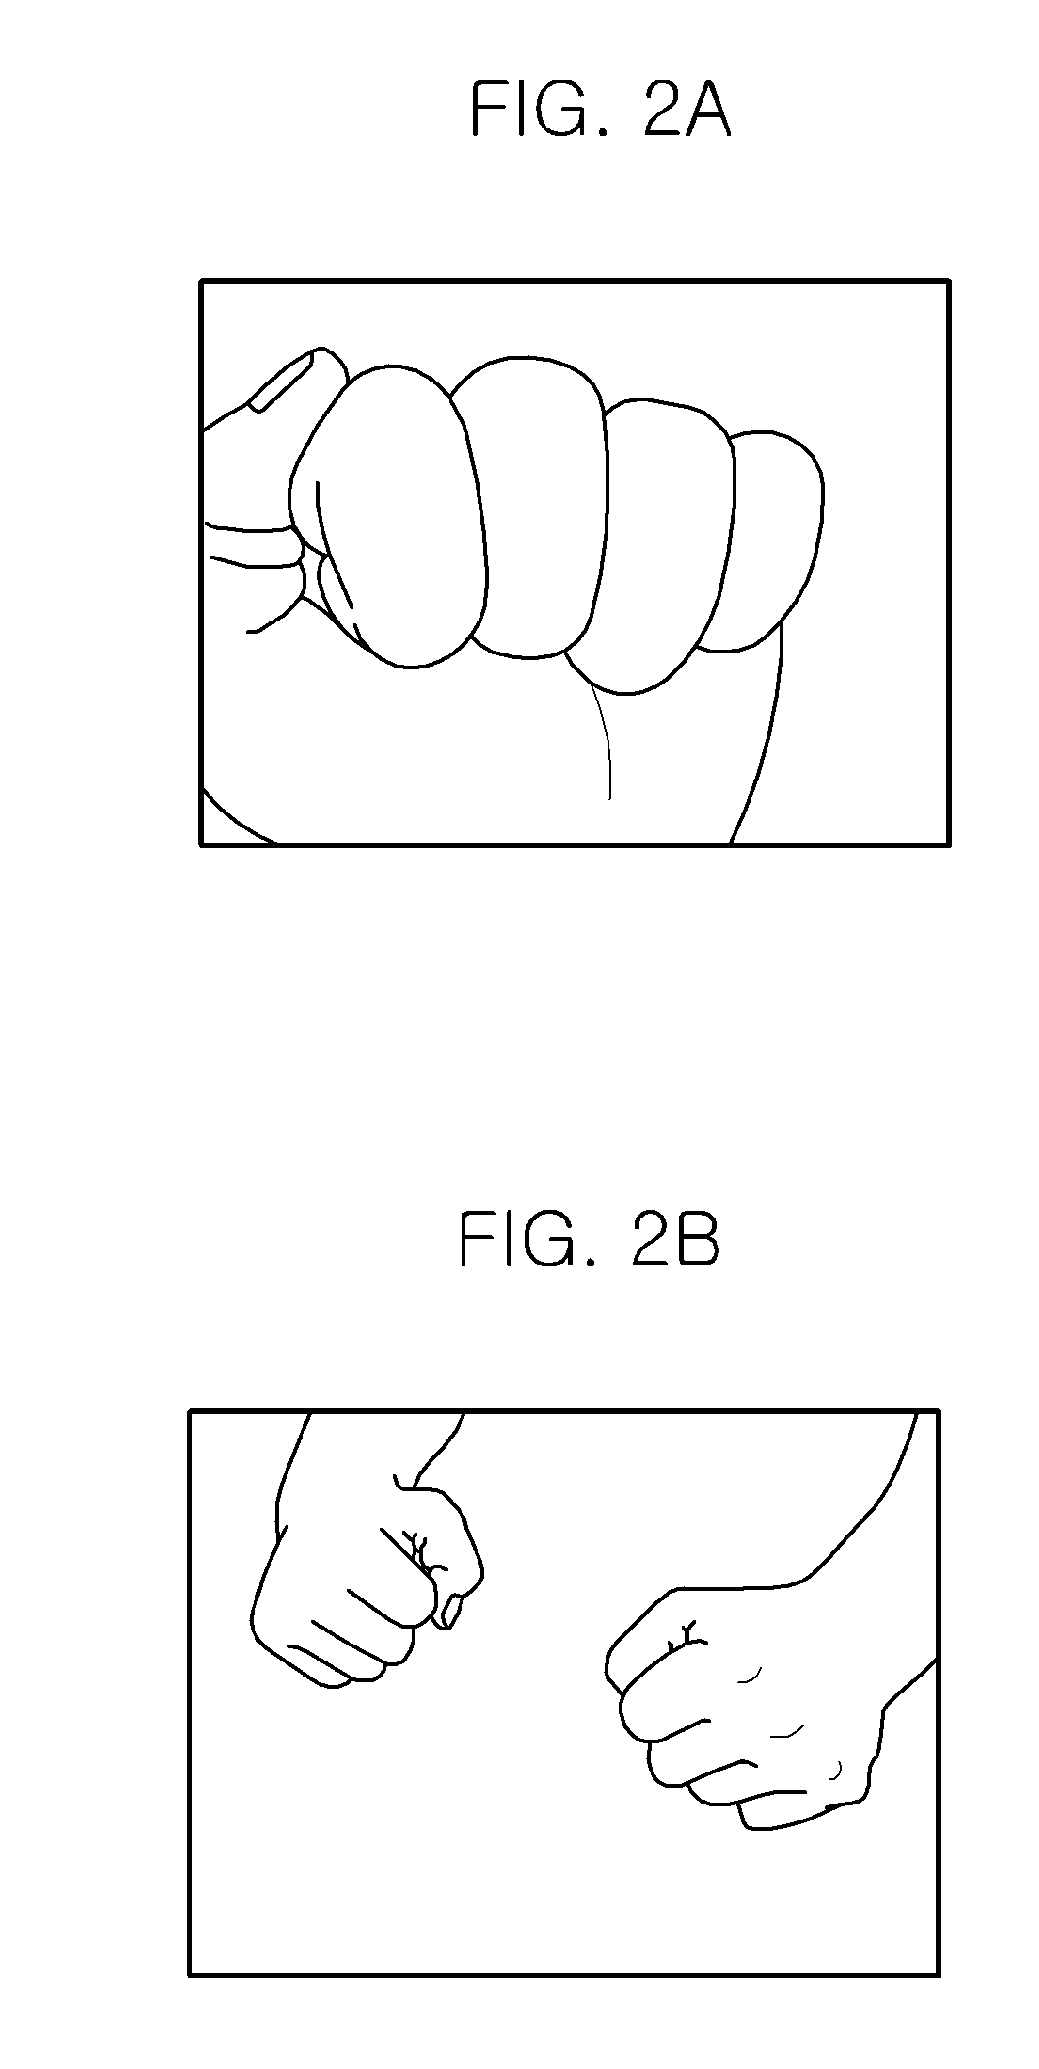 Image-based hand detection apparatus and method